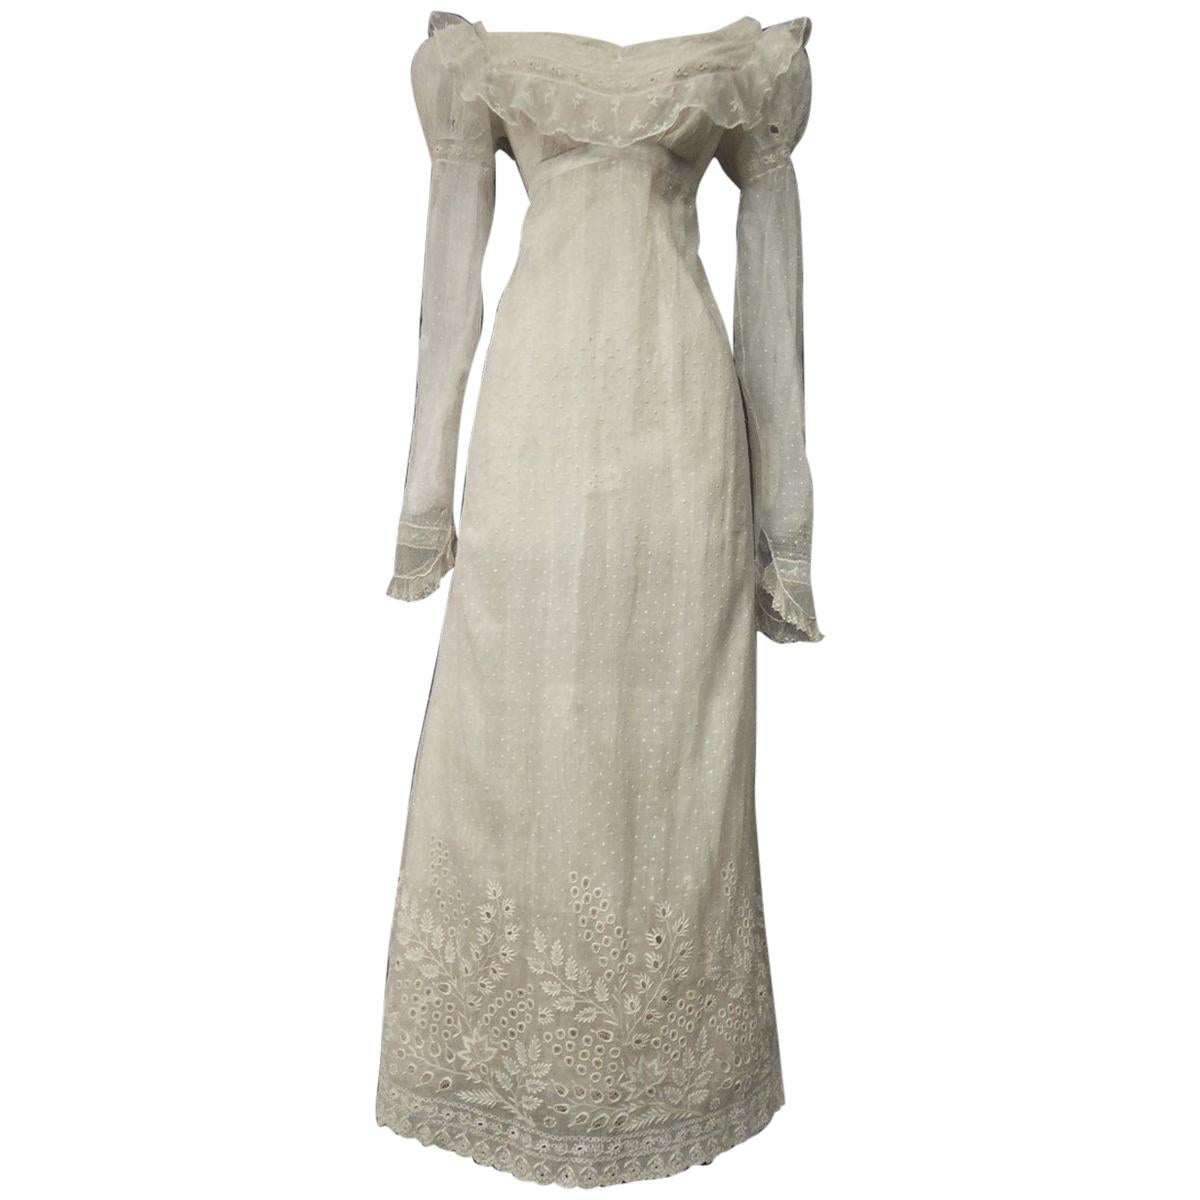 Mameluck Dress in Muslin and Embroidered Veil - First French Empire Circa 1810